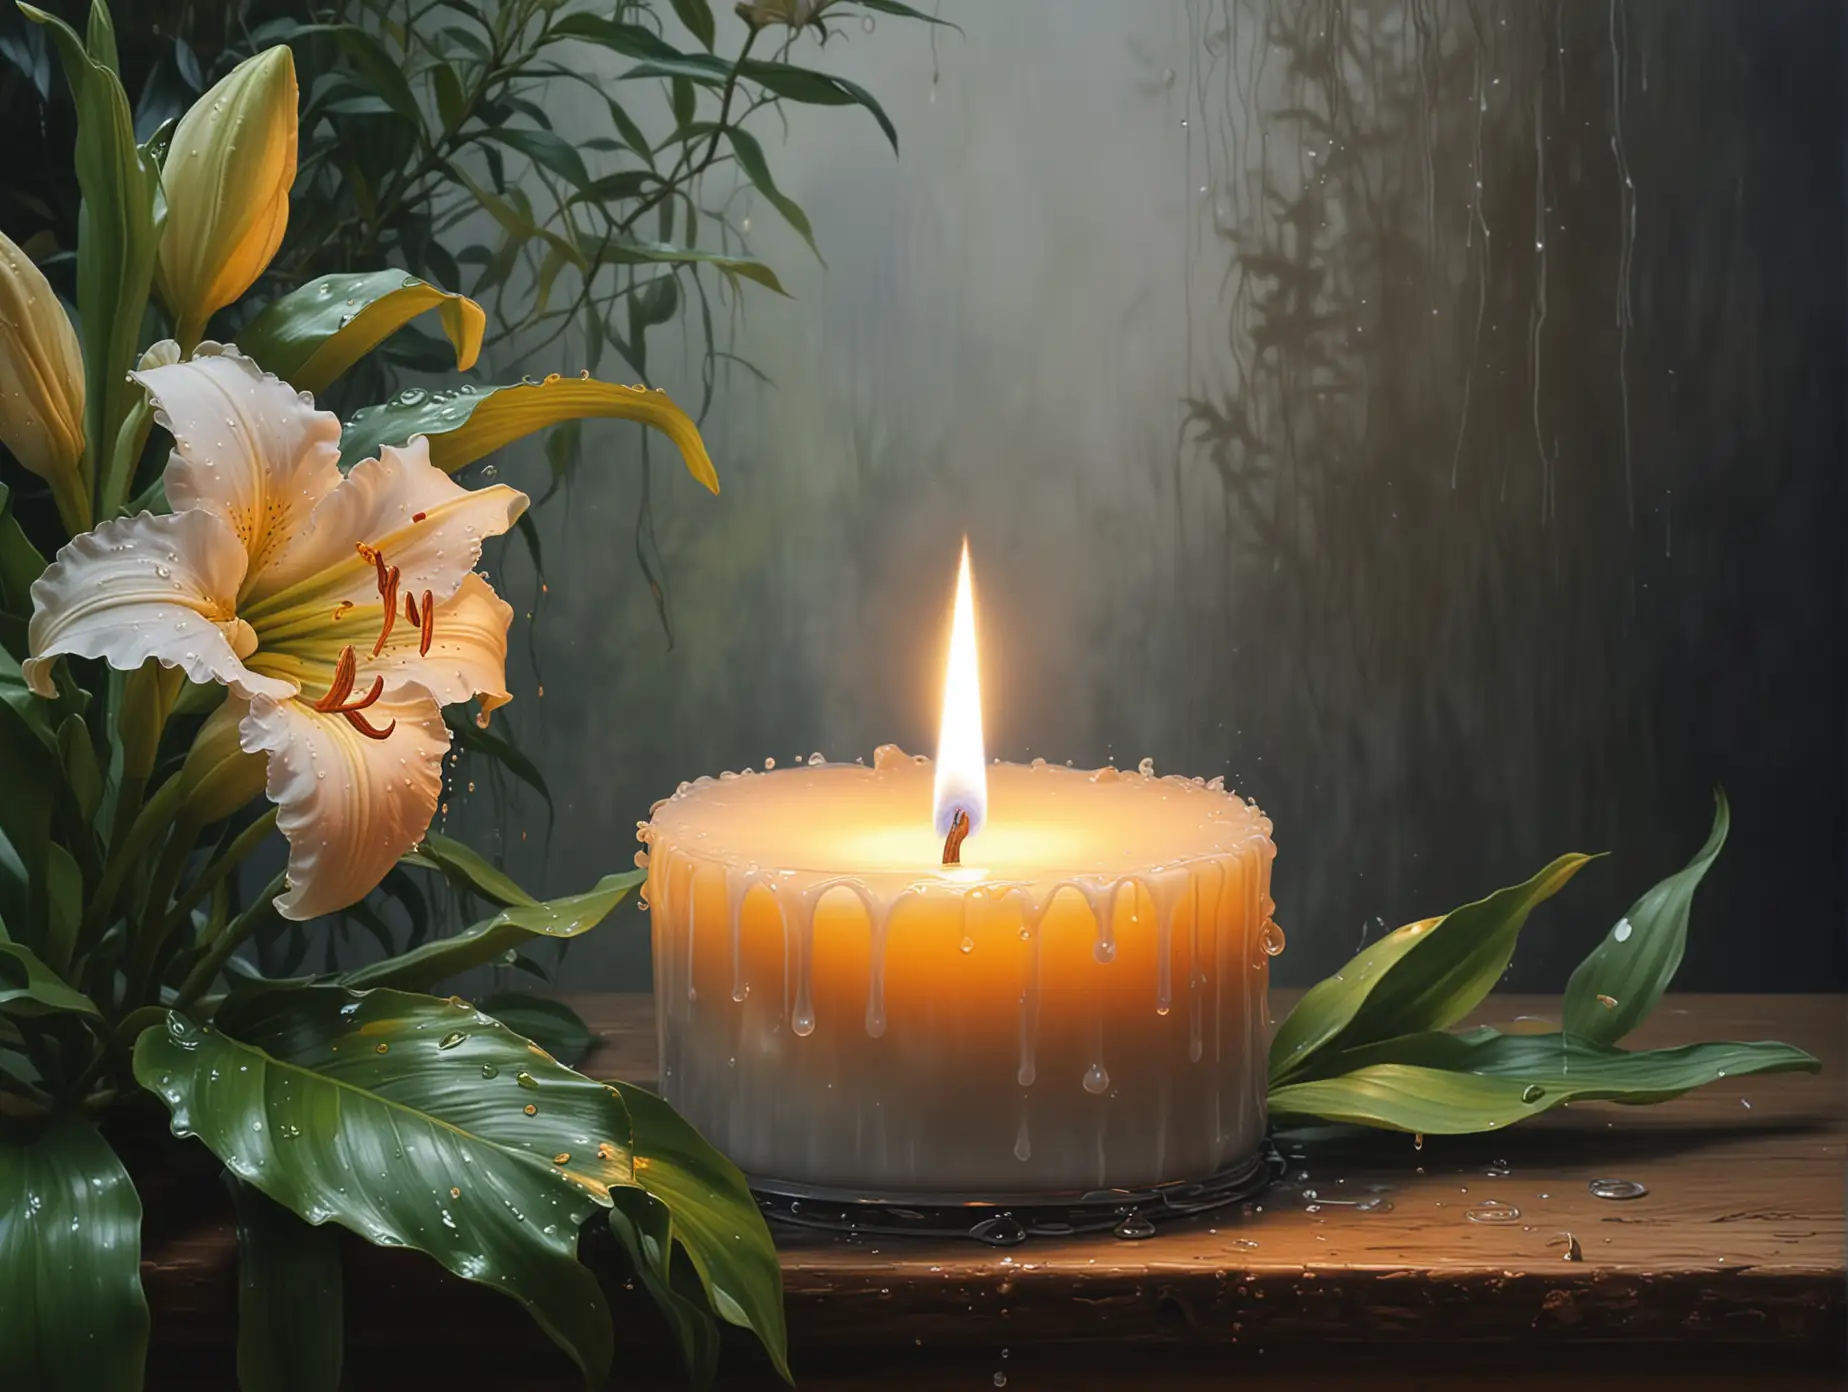 Hyperrealistic Candle Painting with Lily and Blurred Flowers